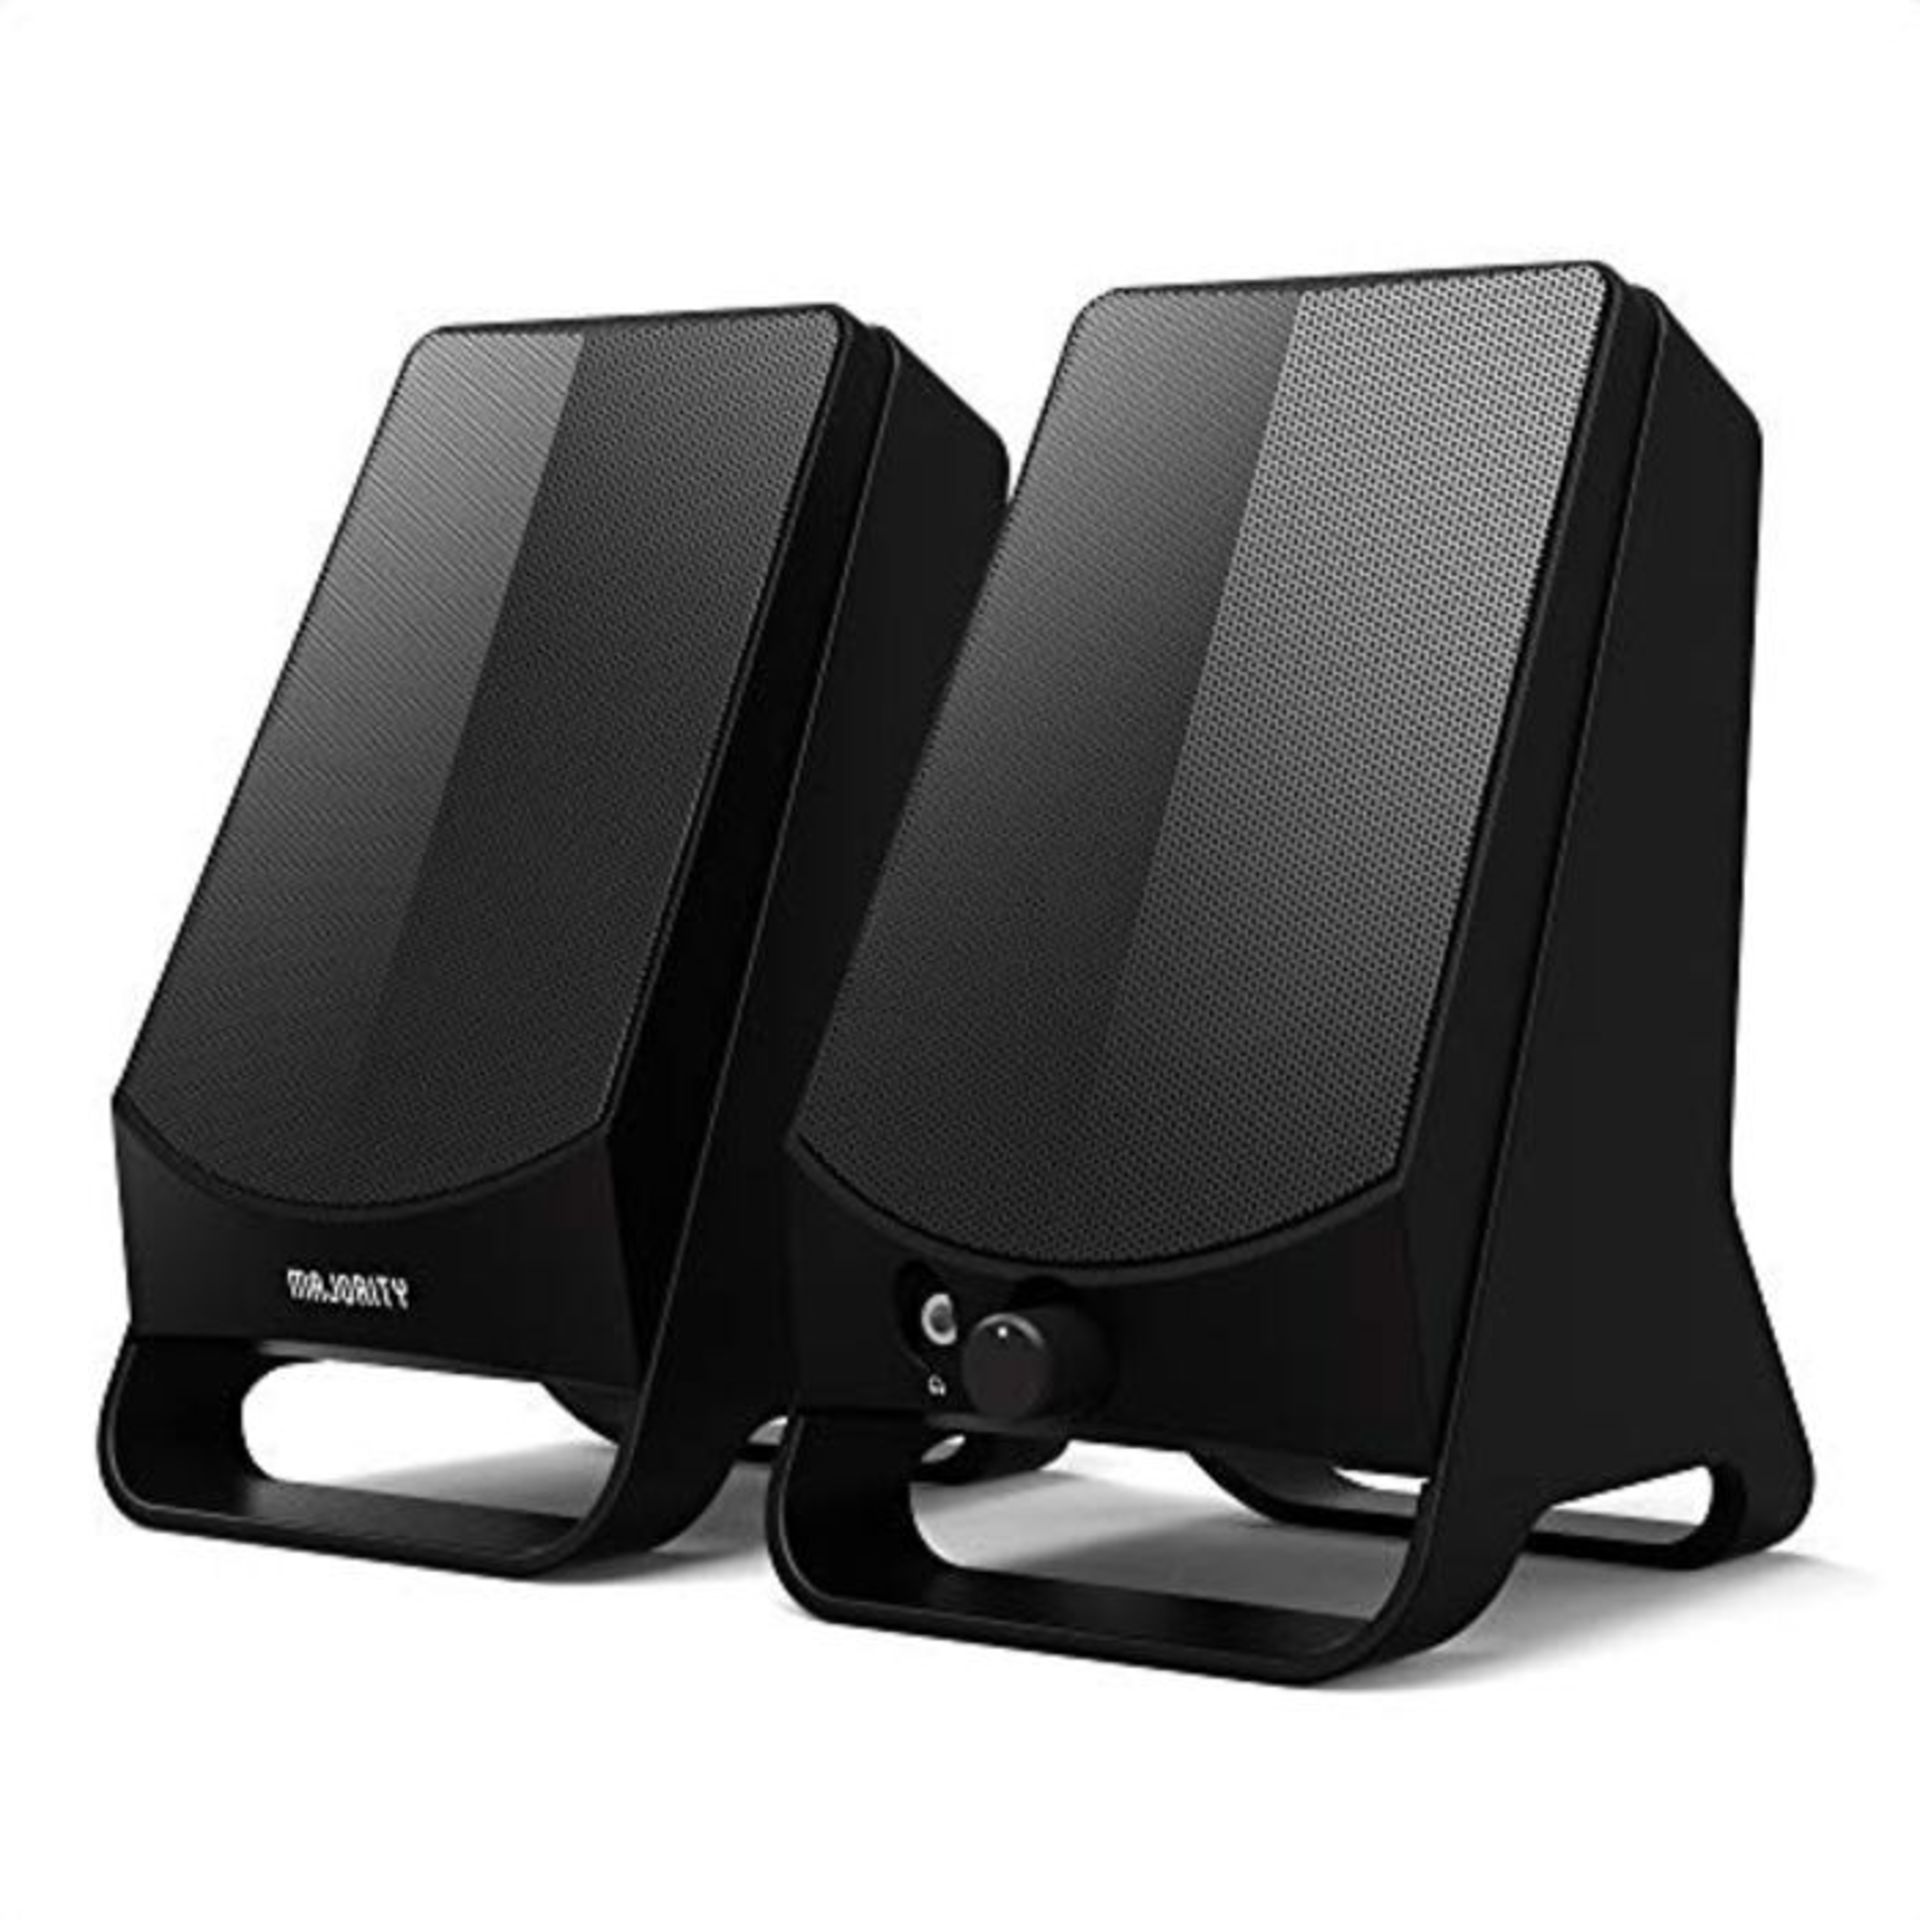 MAJORITY DX10 PC Speakers | 10W Power for USB Plug and Play | Classic Black with multi